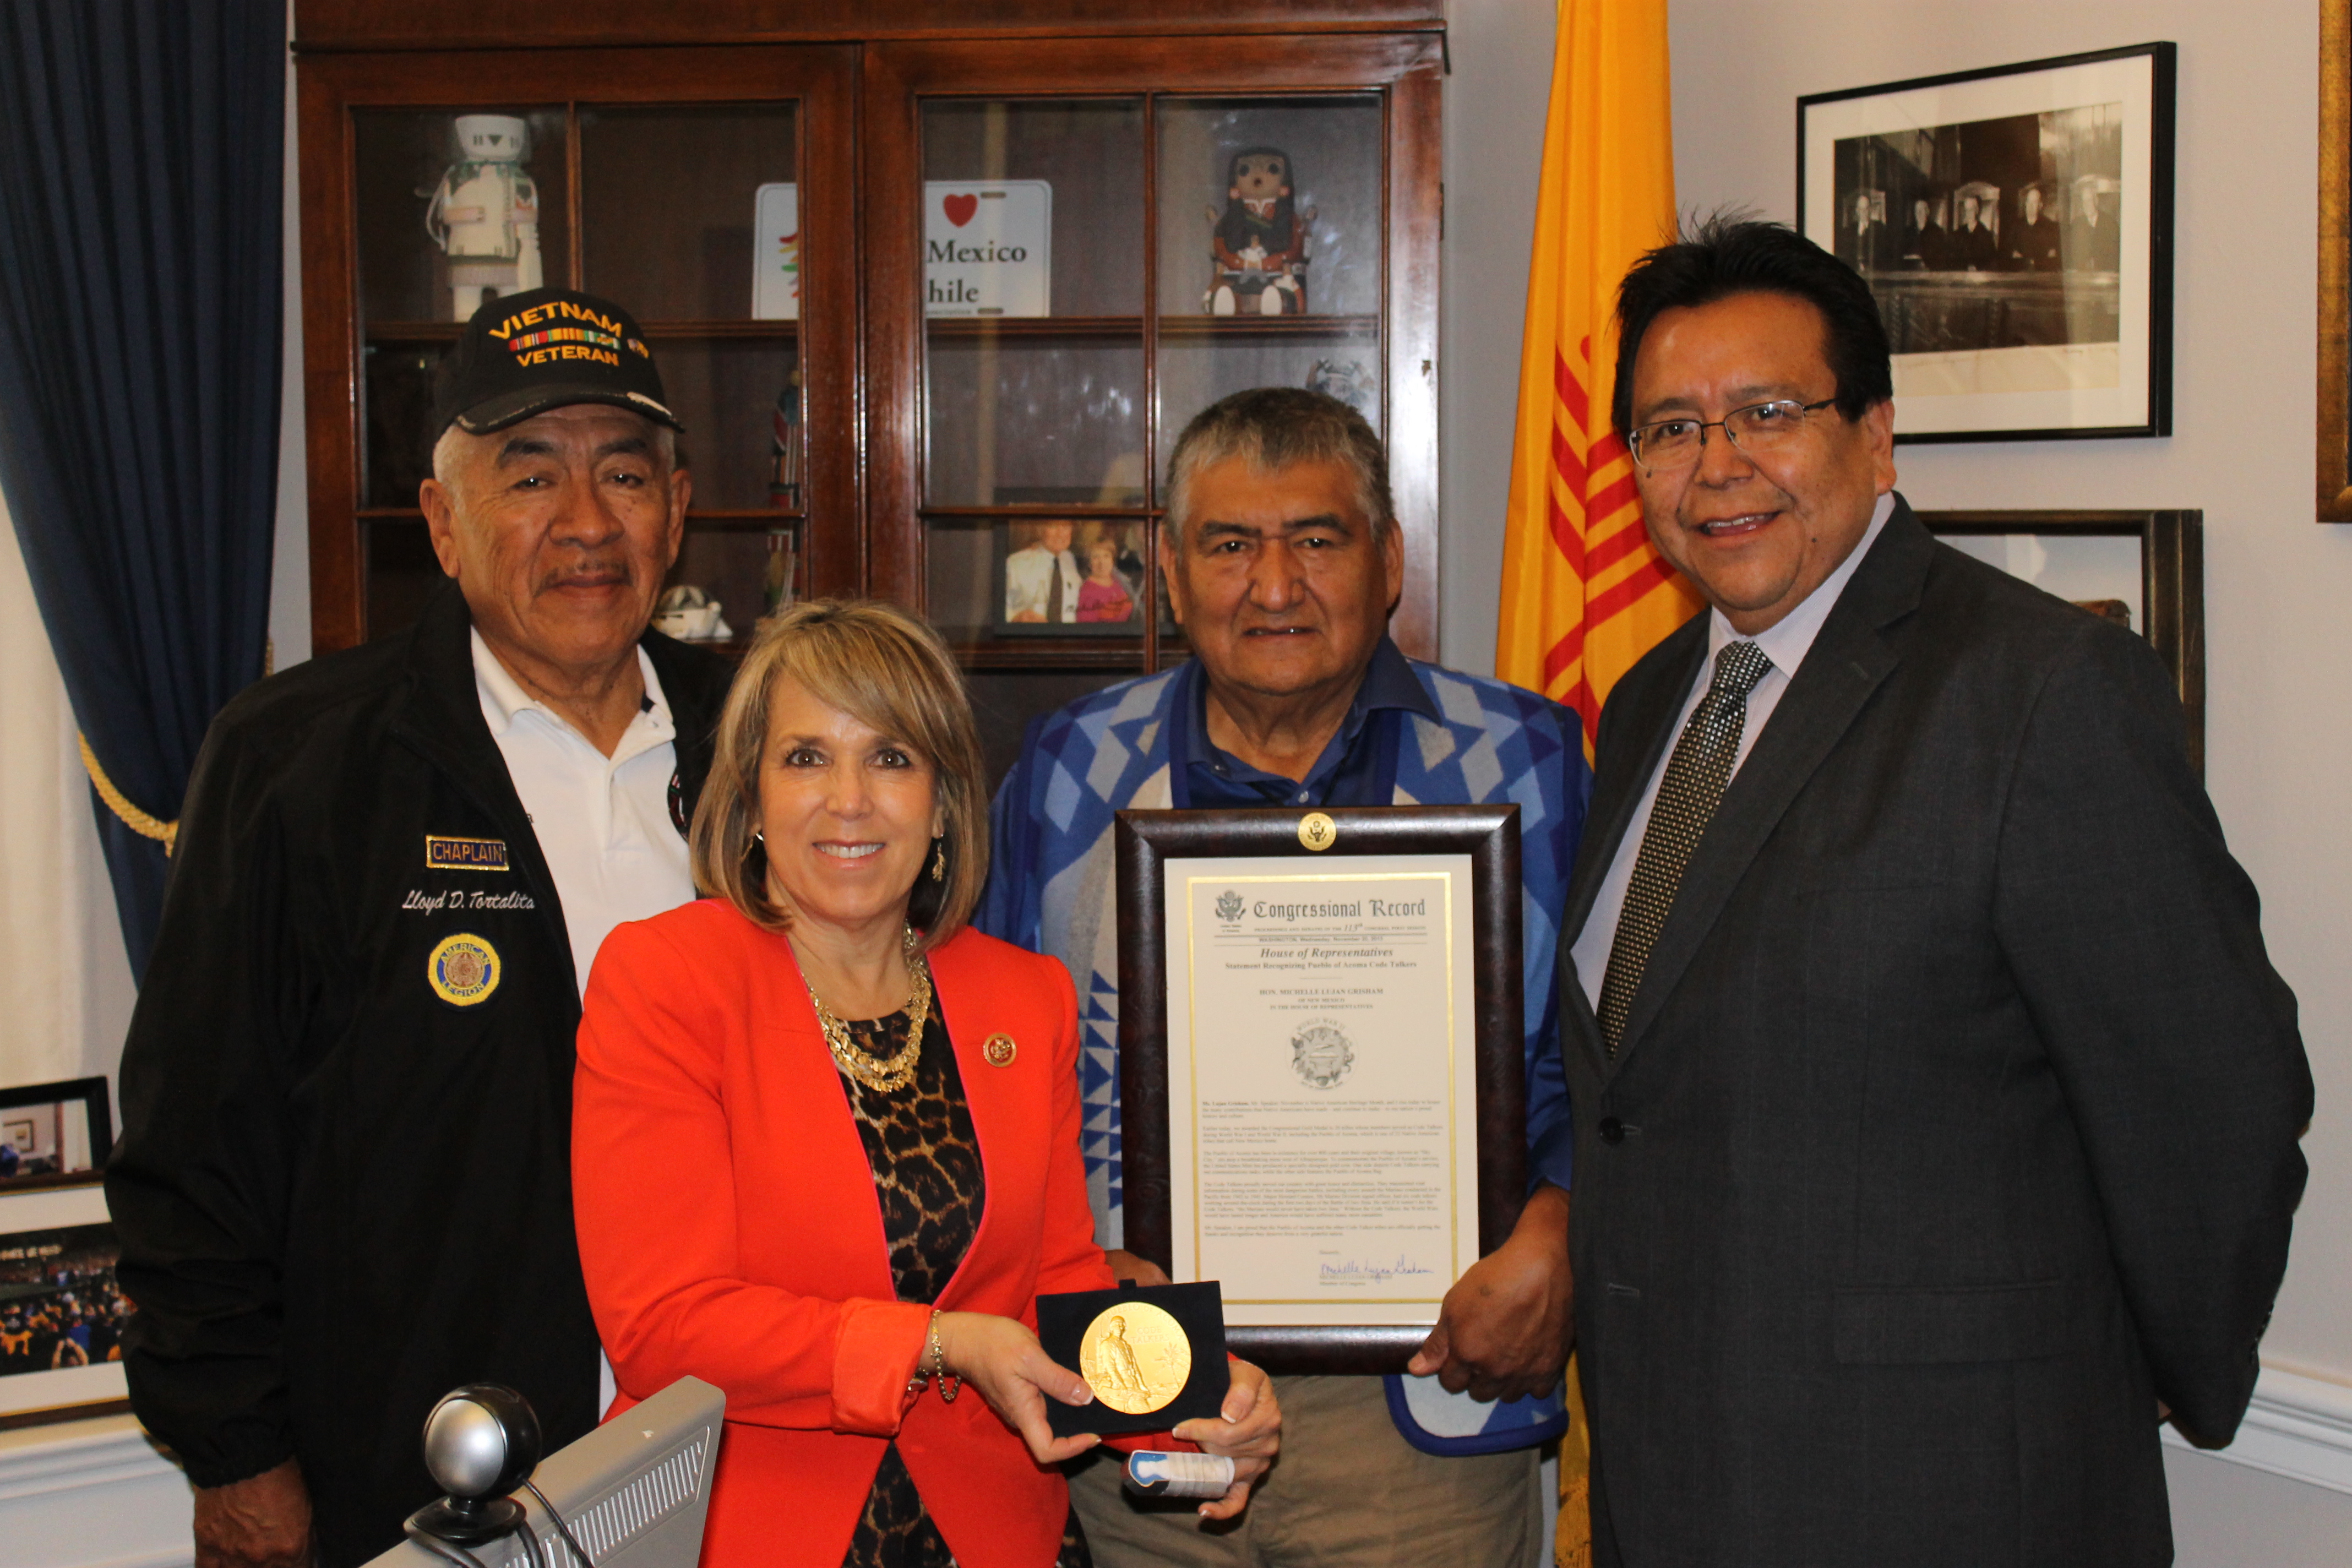 Congresswoman Lujan Grisham presented Pueblo of Acoma Governor Gregg P. Shutiva and other Acoma leaders with a statement she submitted to the Congressional Record honoring the Acoma members who served as  Code Talkers during World War I and II.